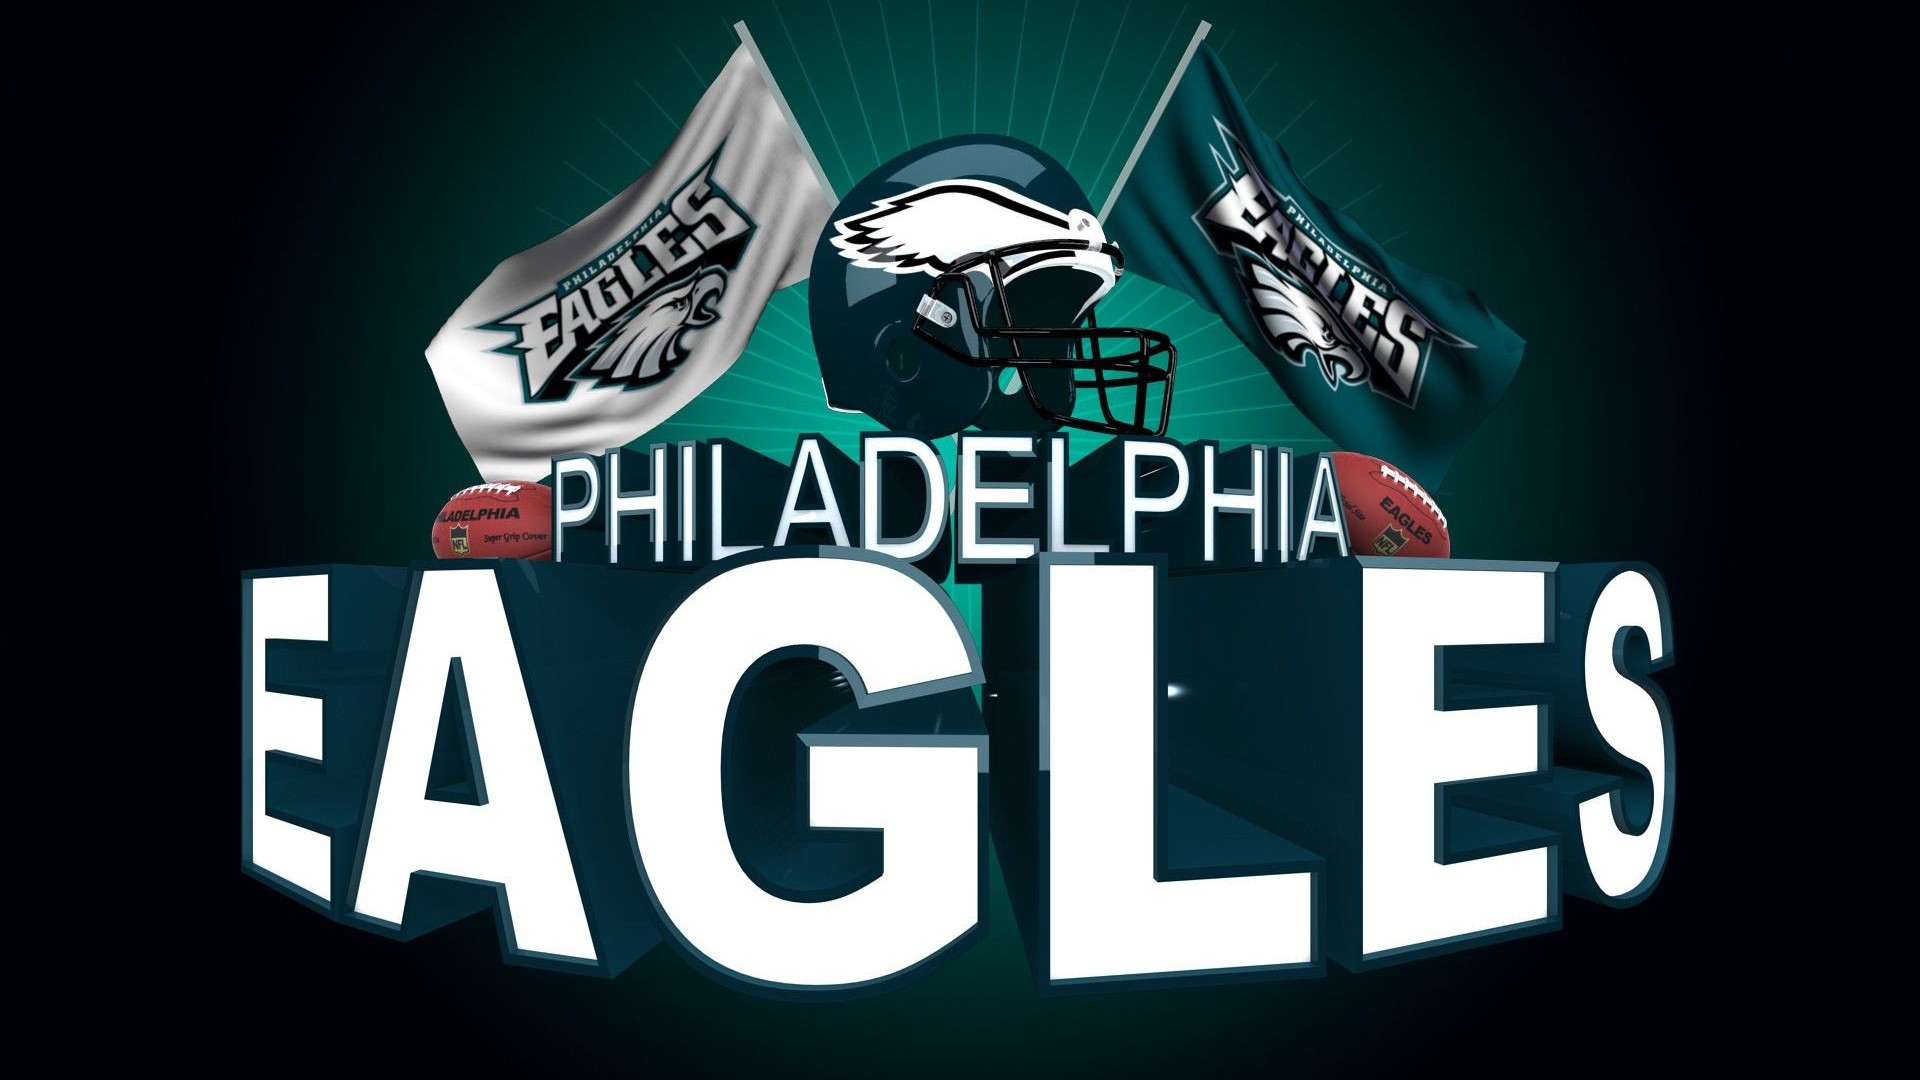 Eagles Football Mac Backgrounds With Resolution 1920X1080 pixel. You can make this wallpaper for your Mac or Windows Desktop Background, iPhone, Android or Tablet and another Smartphone device for free